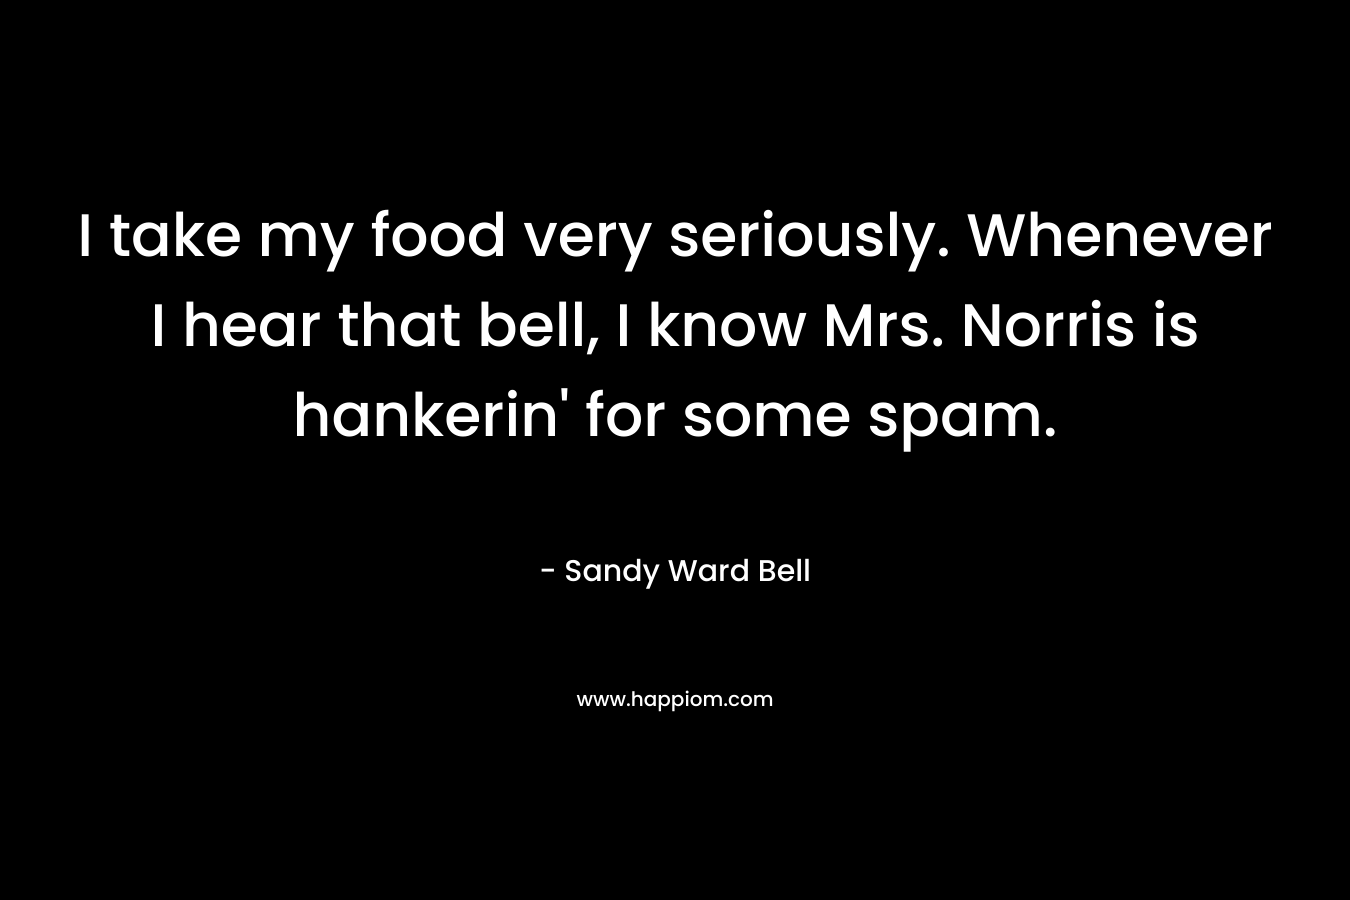 I take my food very seriously. Whenever I hear that bell, I know Mrs. Norris is hankerin’ for some spam. – Sandy Ward Bell